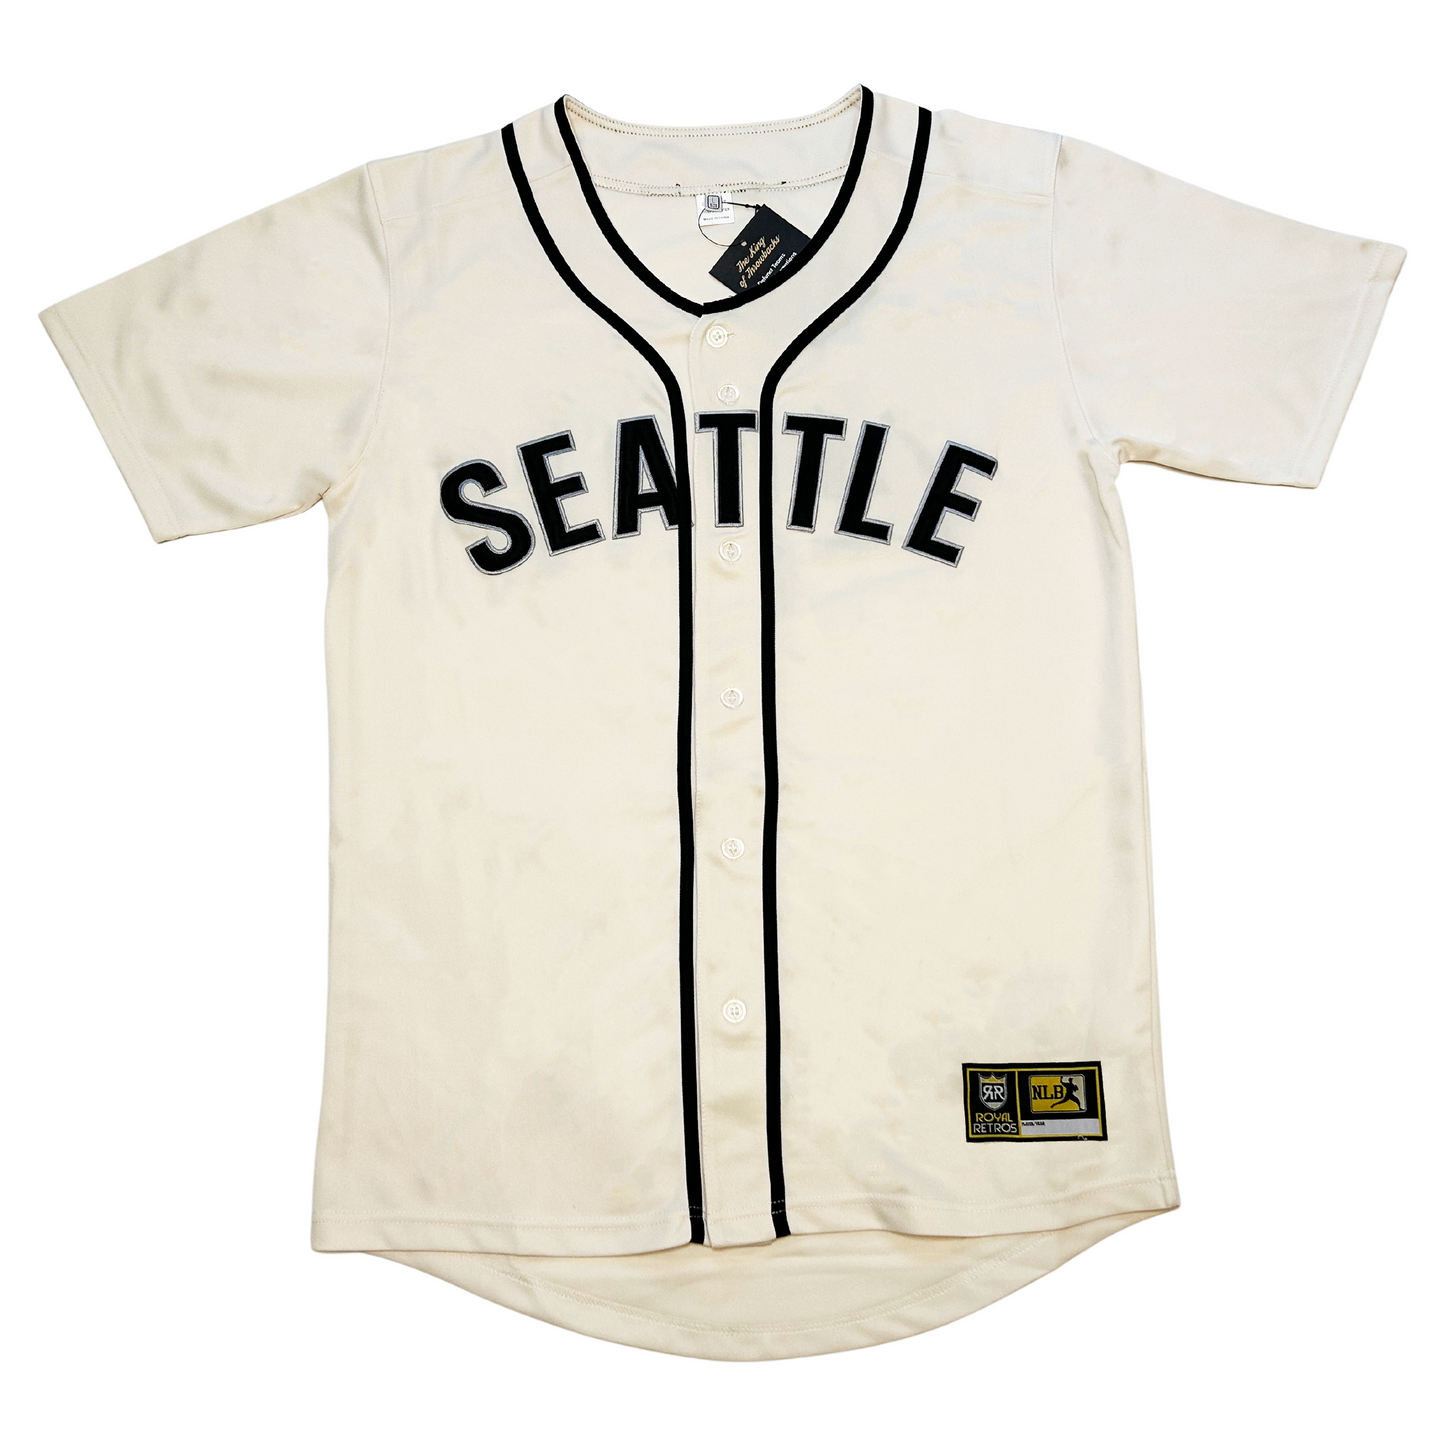 Mariners should replace their Sunday cream jerseys with throwback